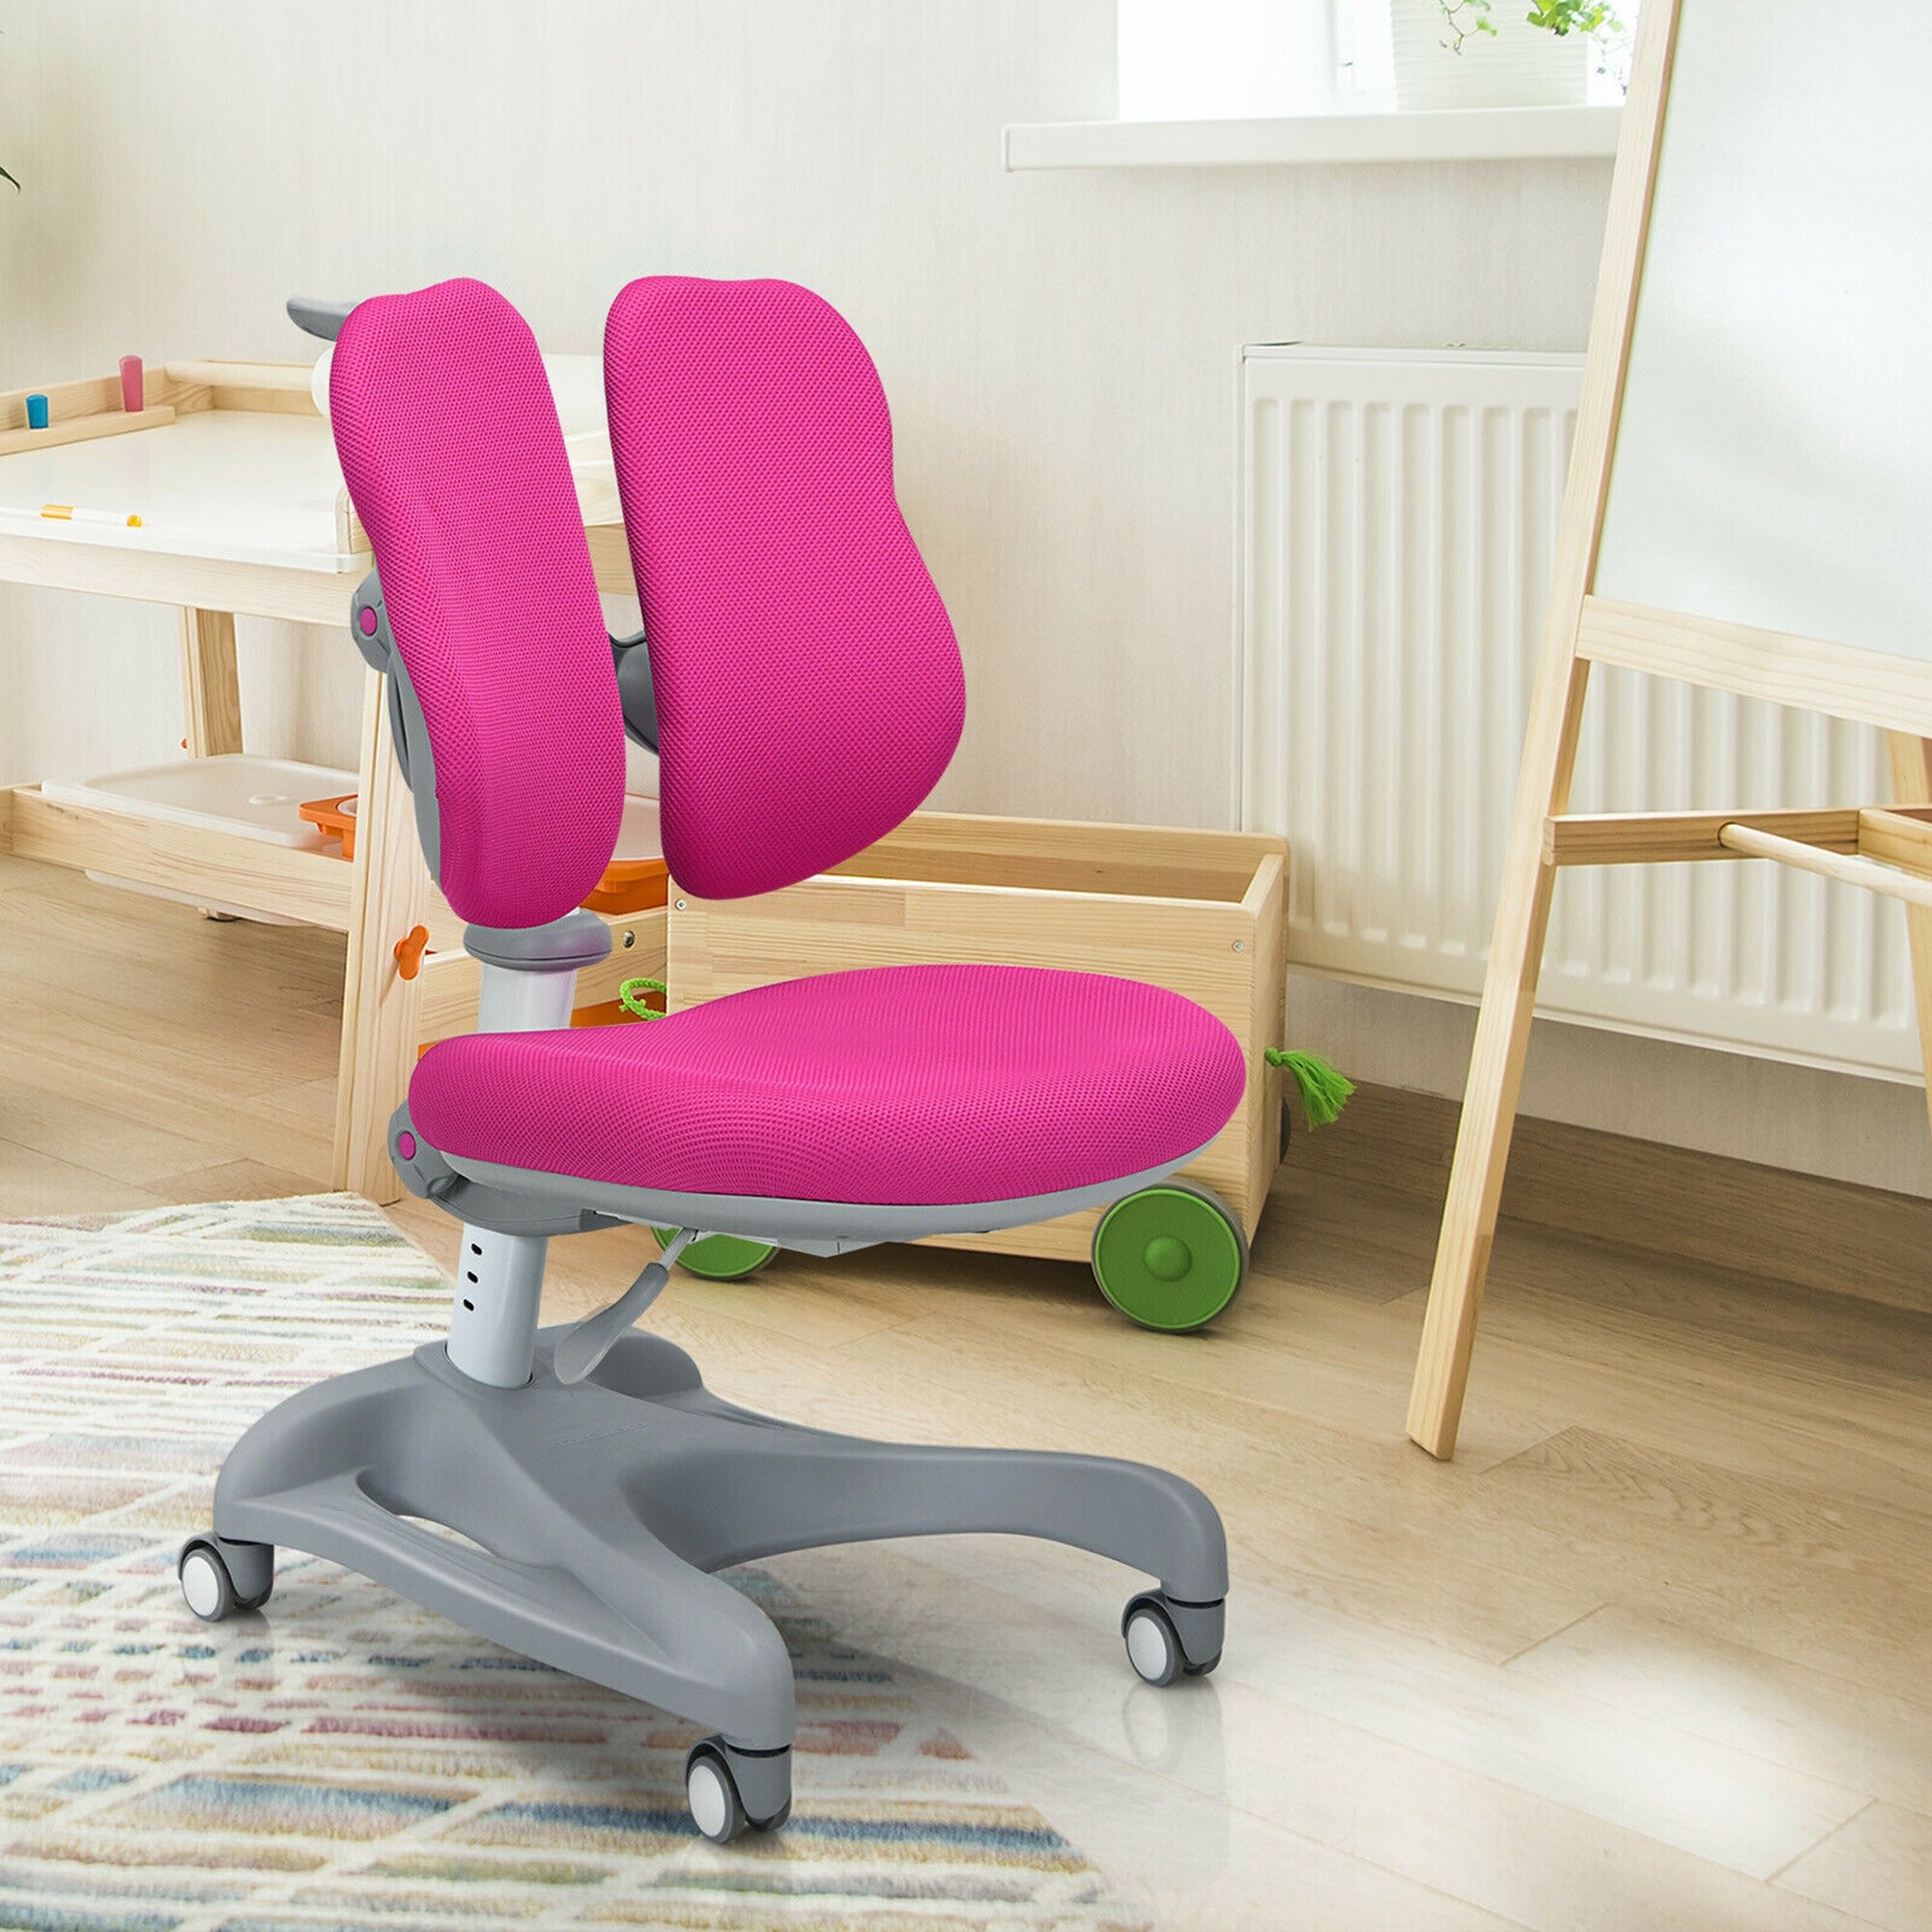 https://ak1.ostkcdn.com/images/products/is/images/direct/7039363d705ca4b8266a130c97ad884c657fda8a/Gymax-Kids-Study-Desk-Chair-Adjustable-Height-Depth-w-Sit-Brake.jpg